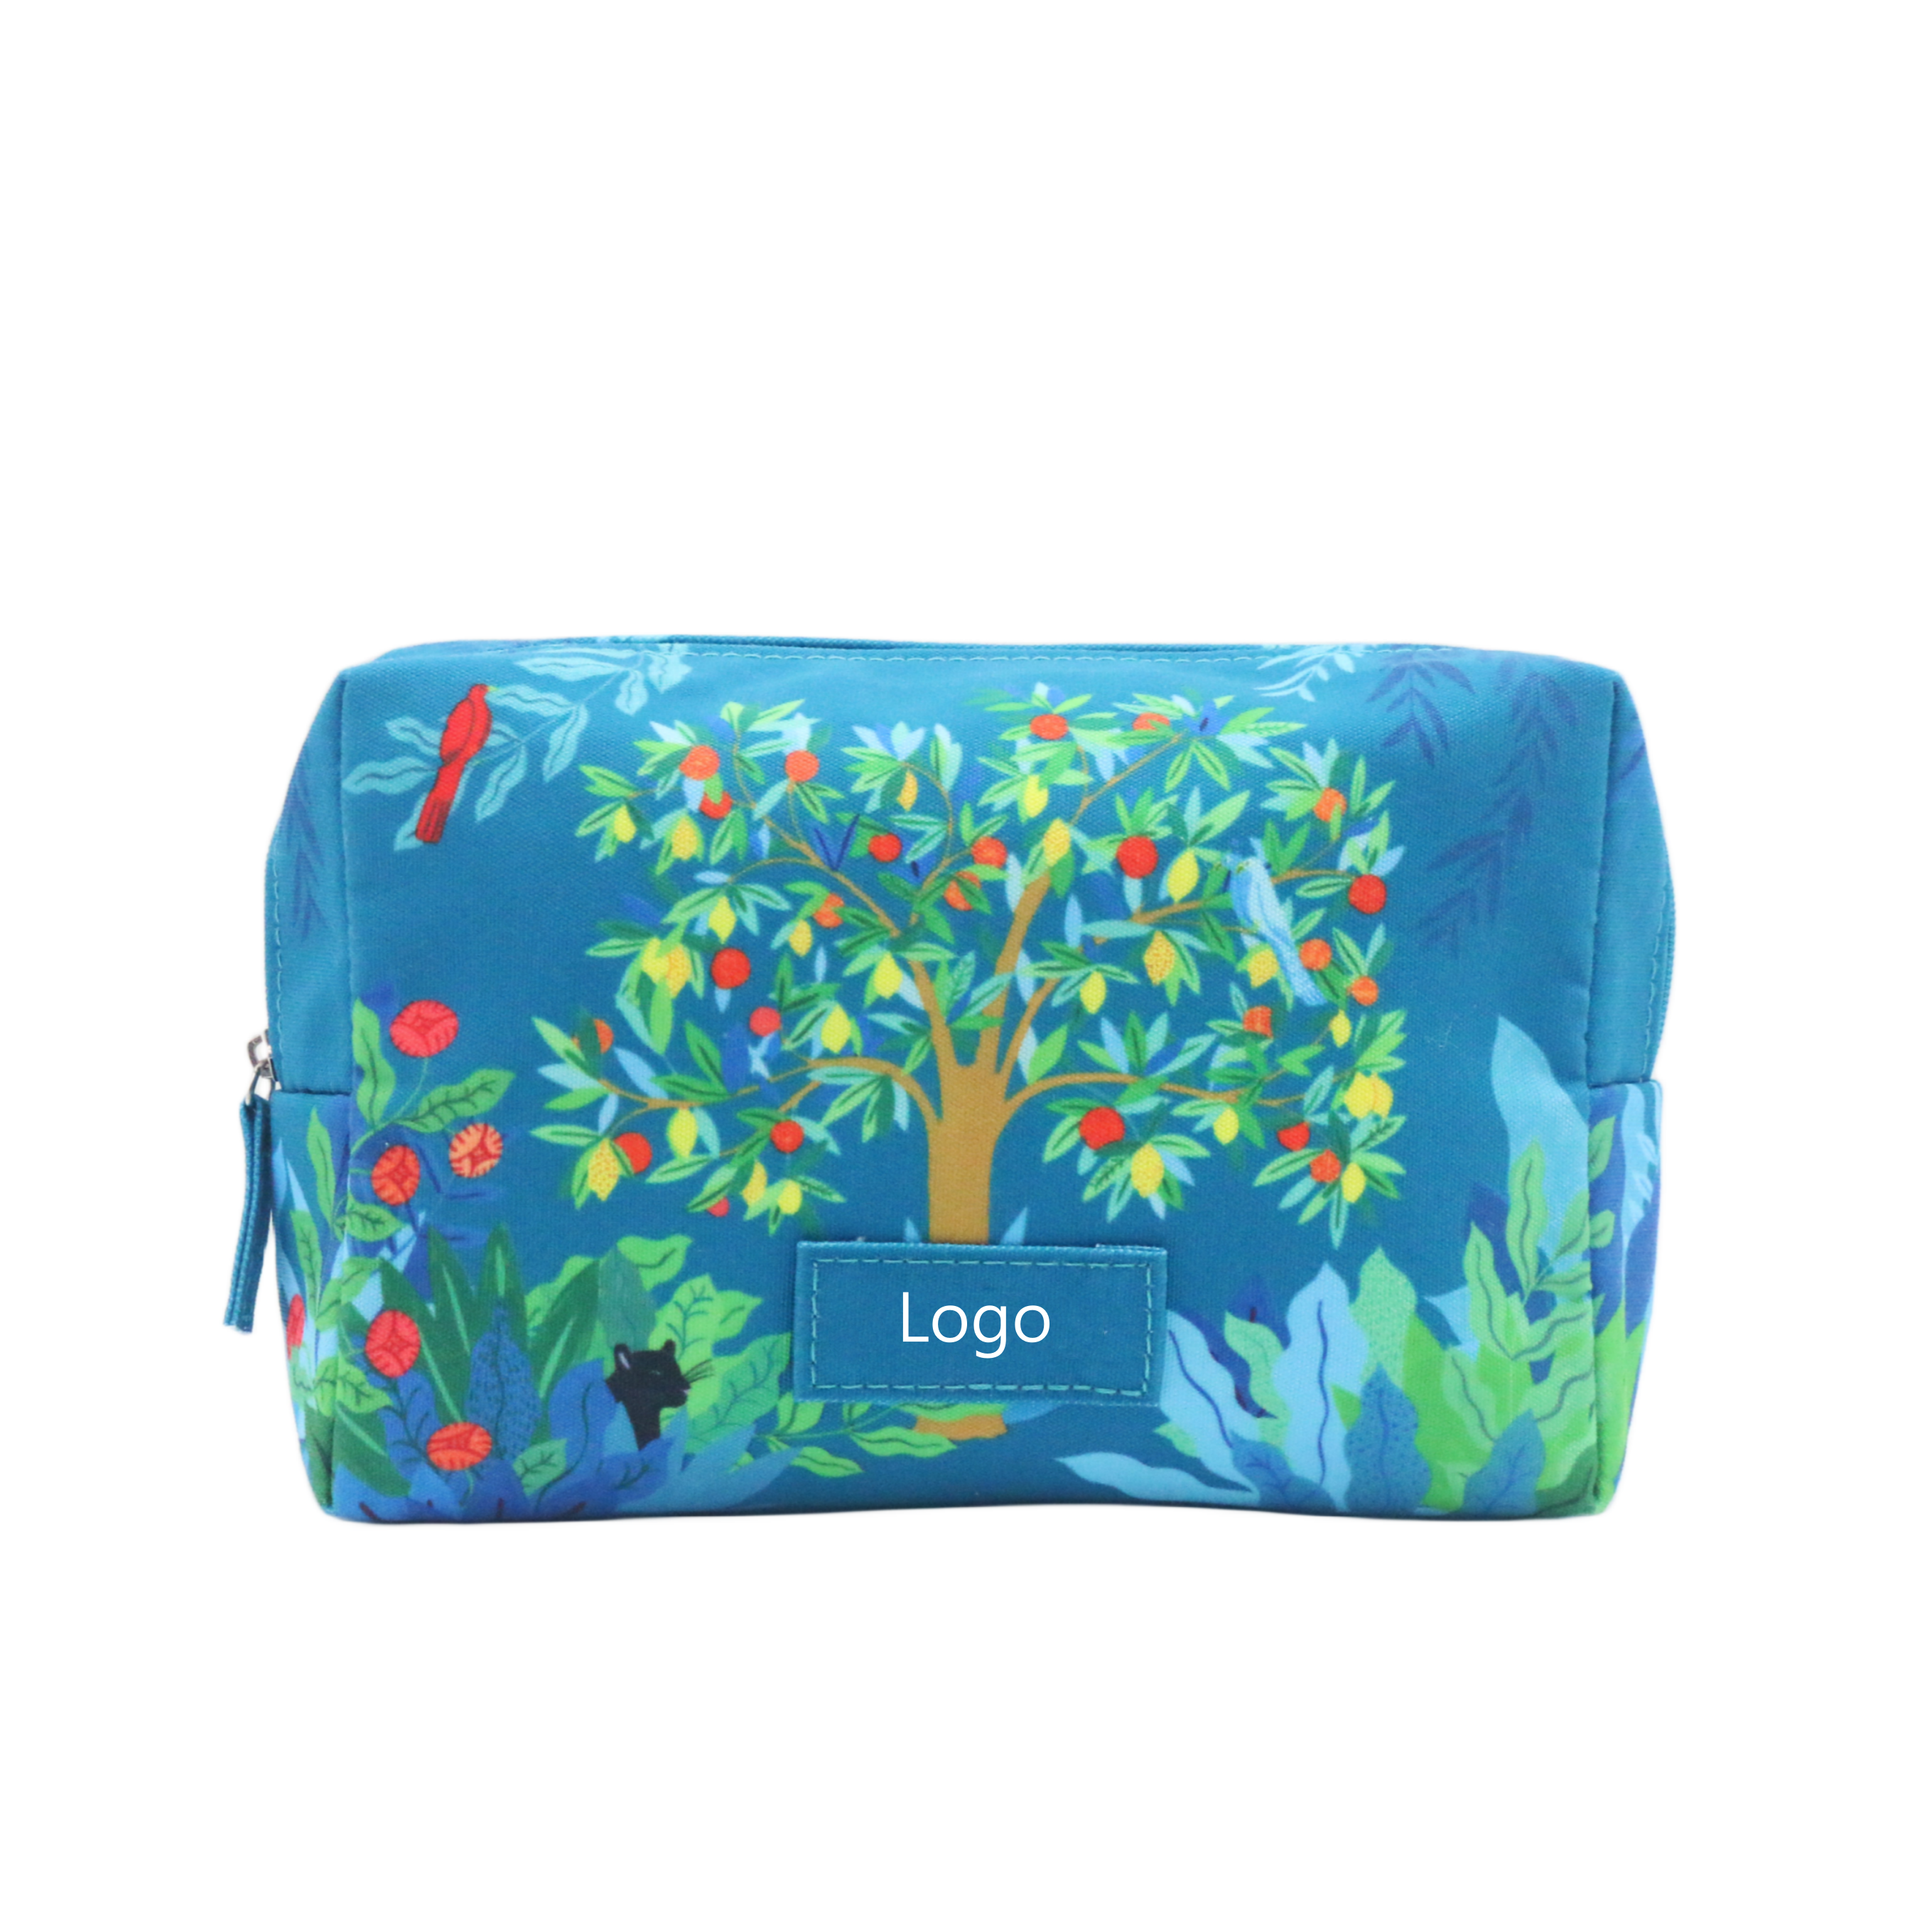 Recycled Cotton Makeup Pouch Popular Floral Prints Blue Cotton Canvas Cosmetic Bag